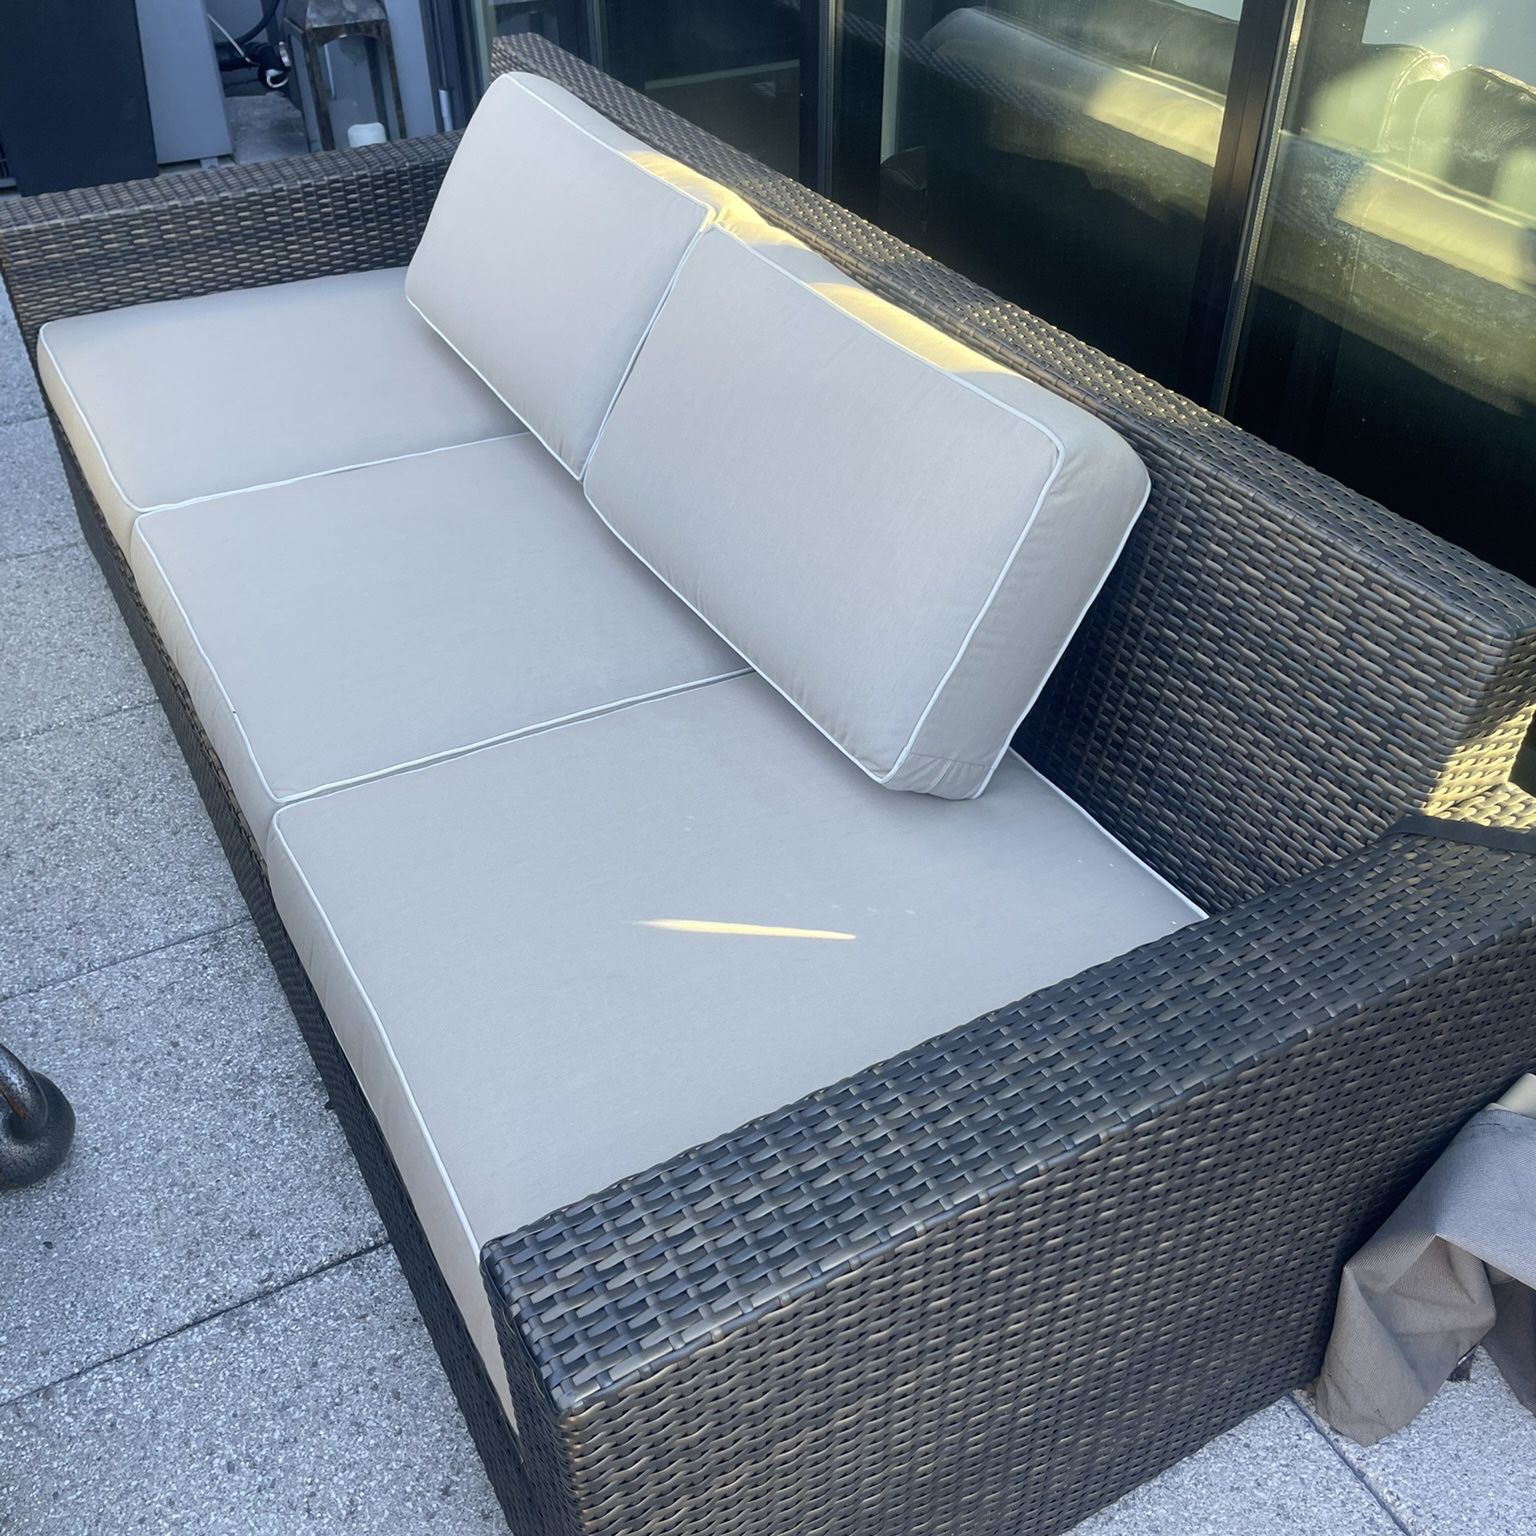 Brand New Outdoor Patio Furniture Never Used!